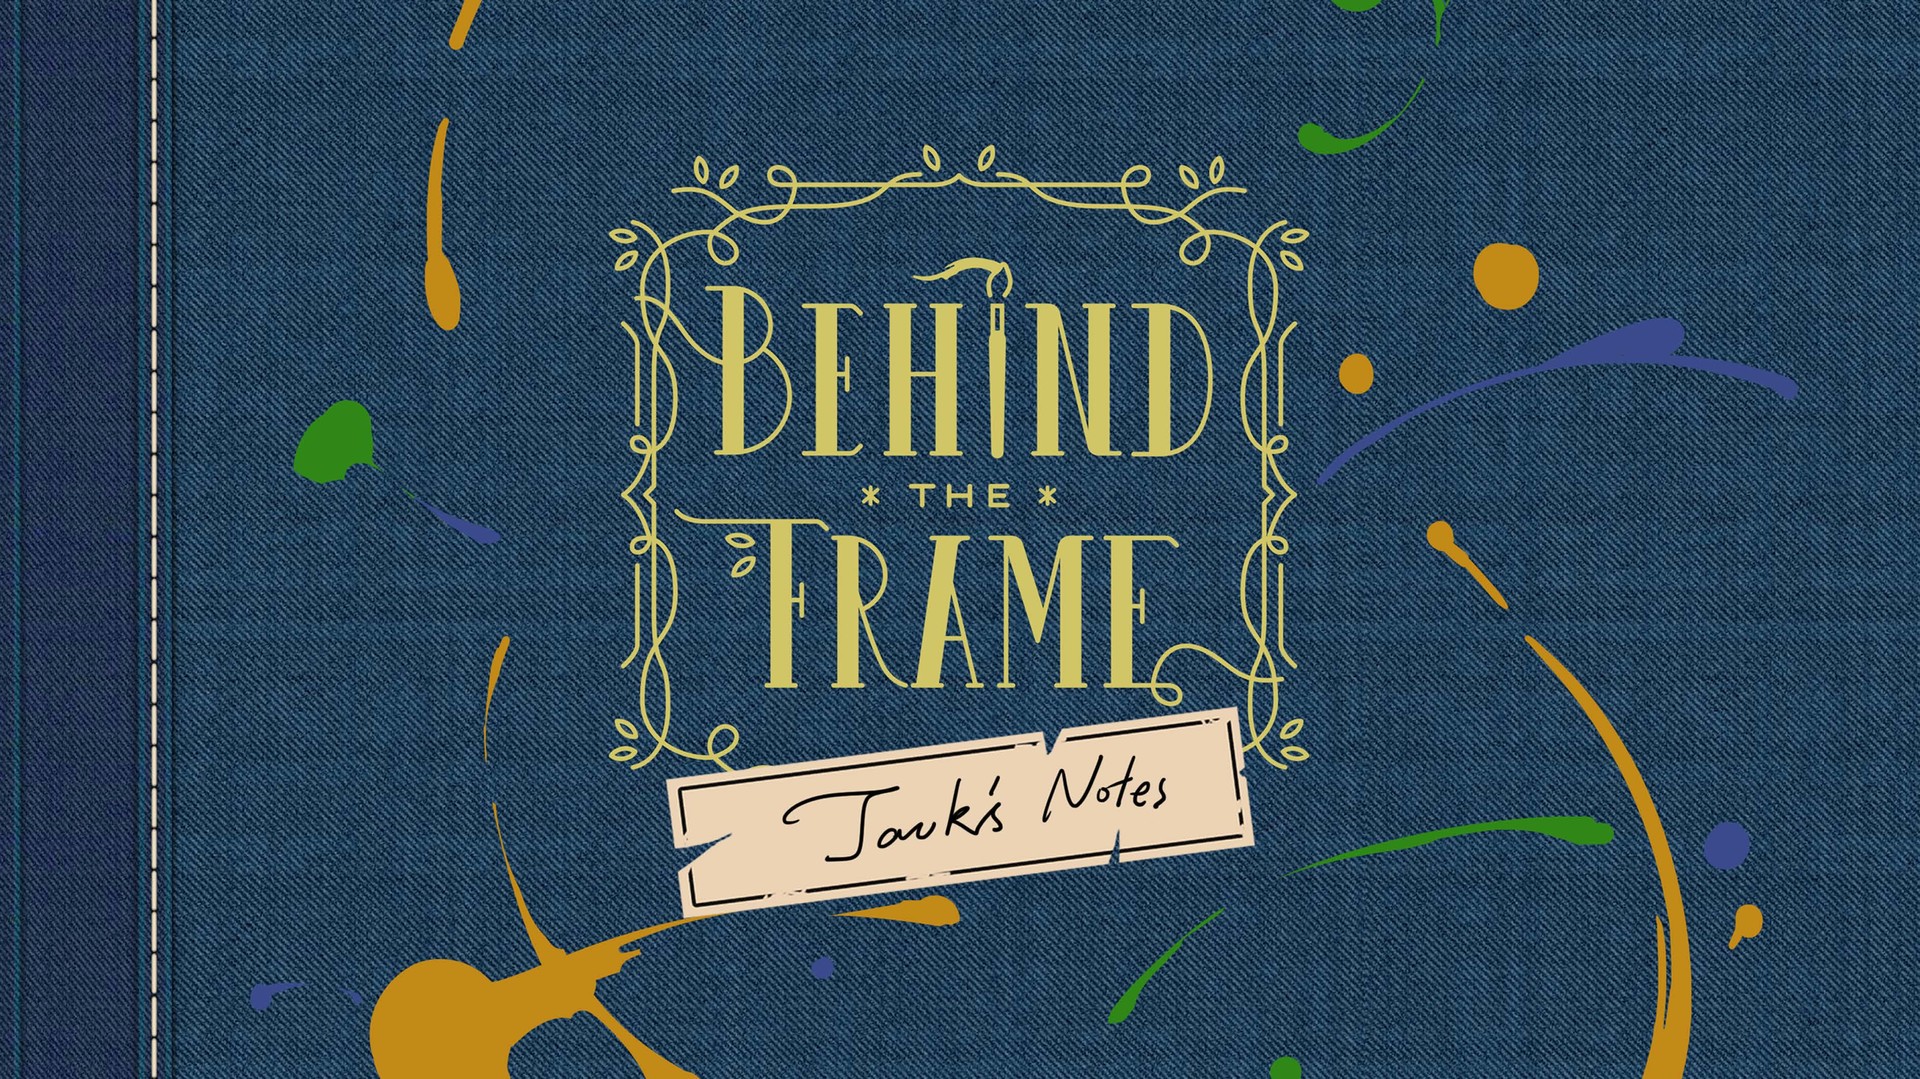 Behind the Frame: The Finest Scenery - Art Book #2 Featured Screenshot #1